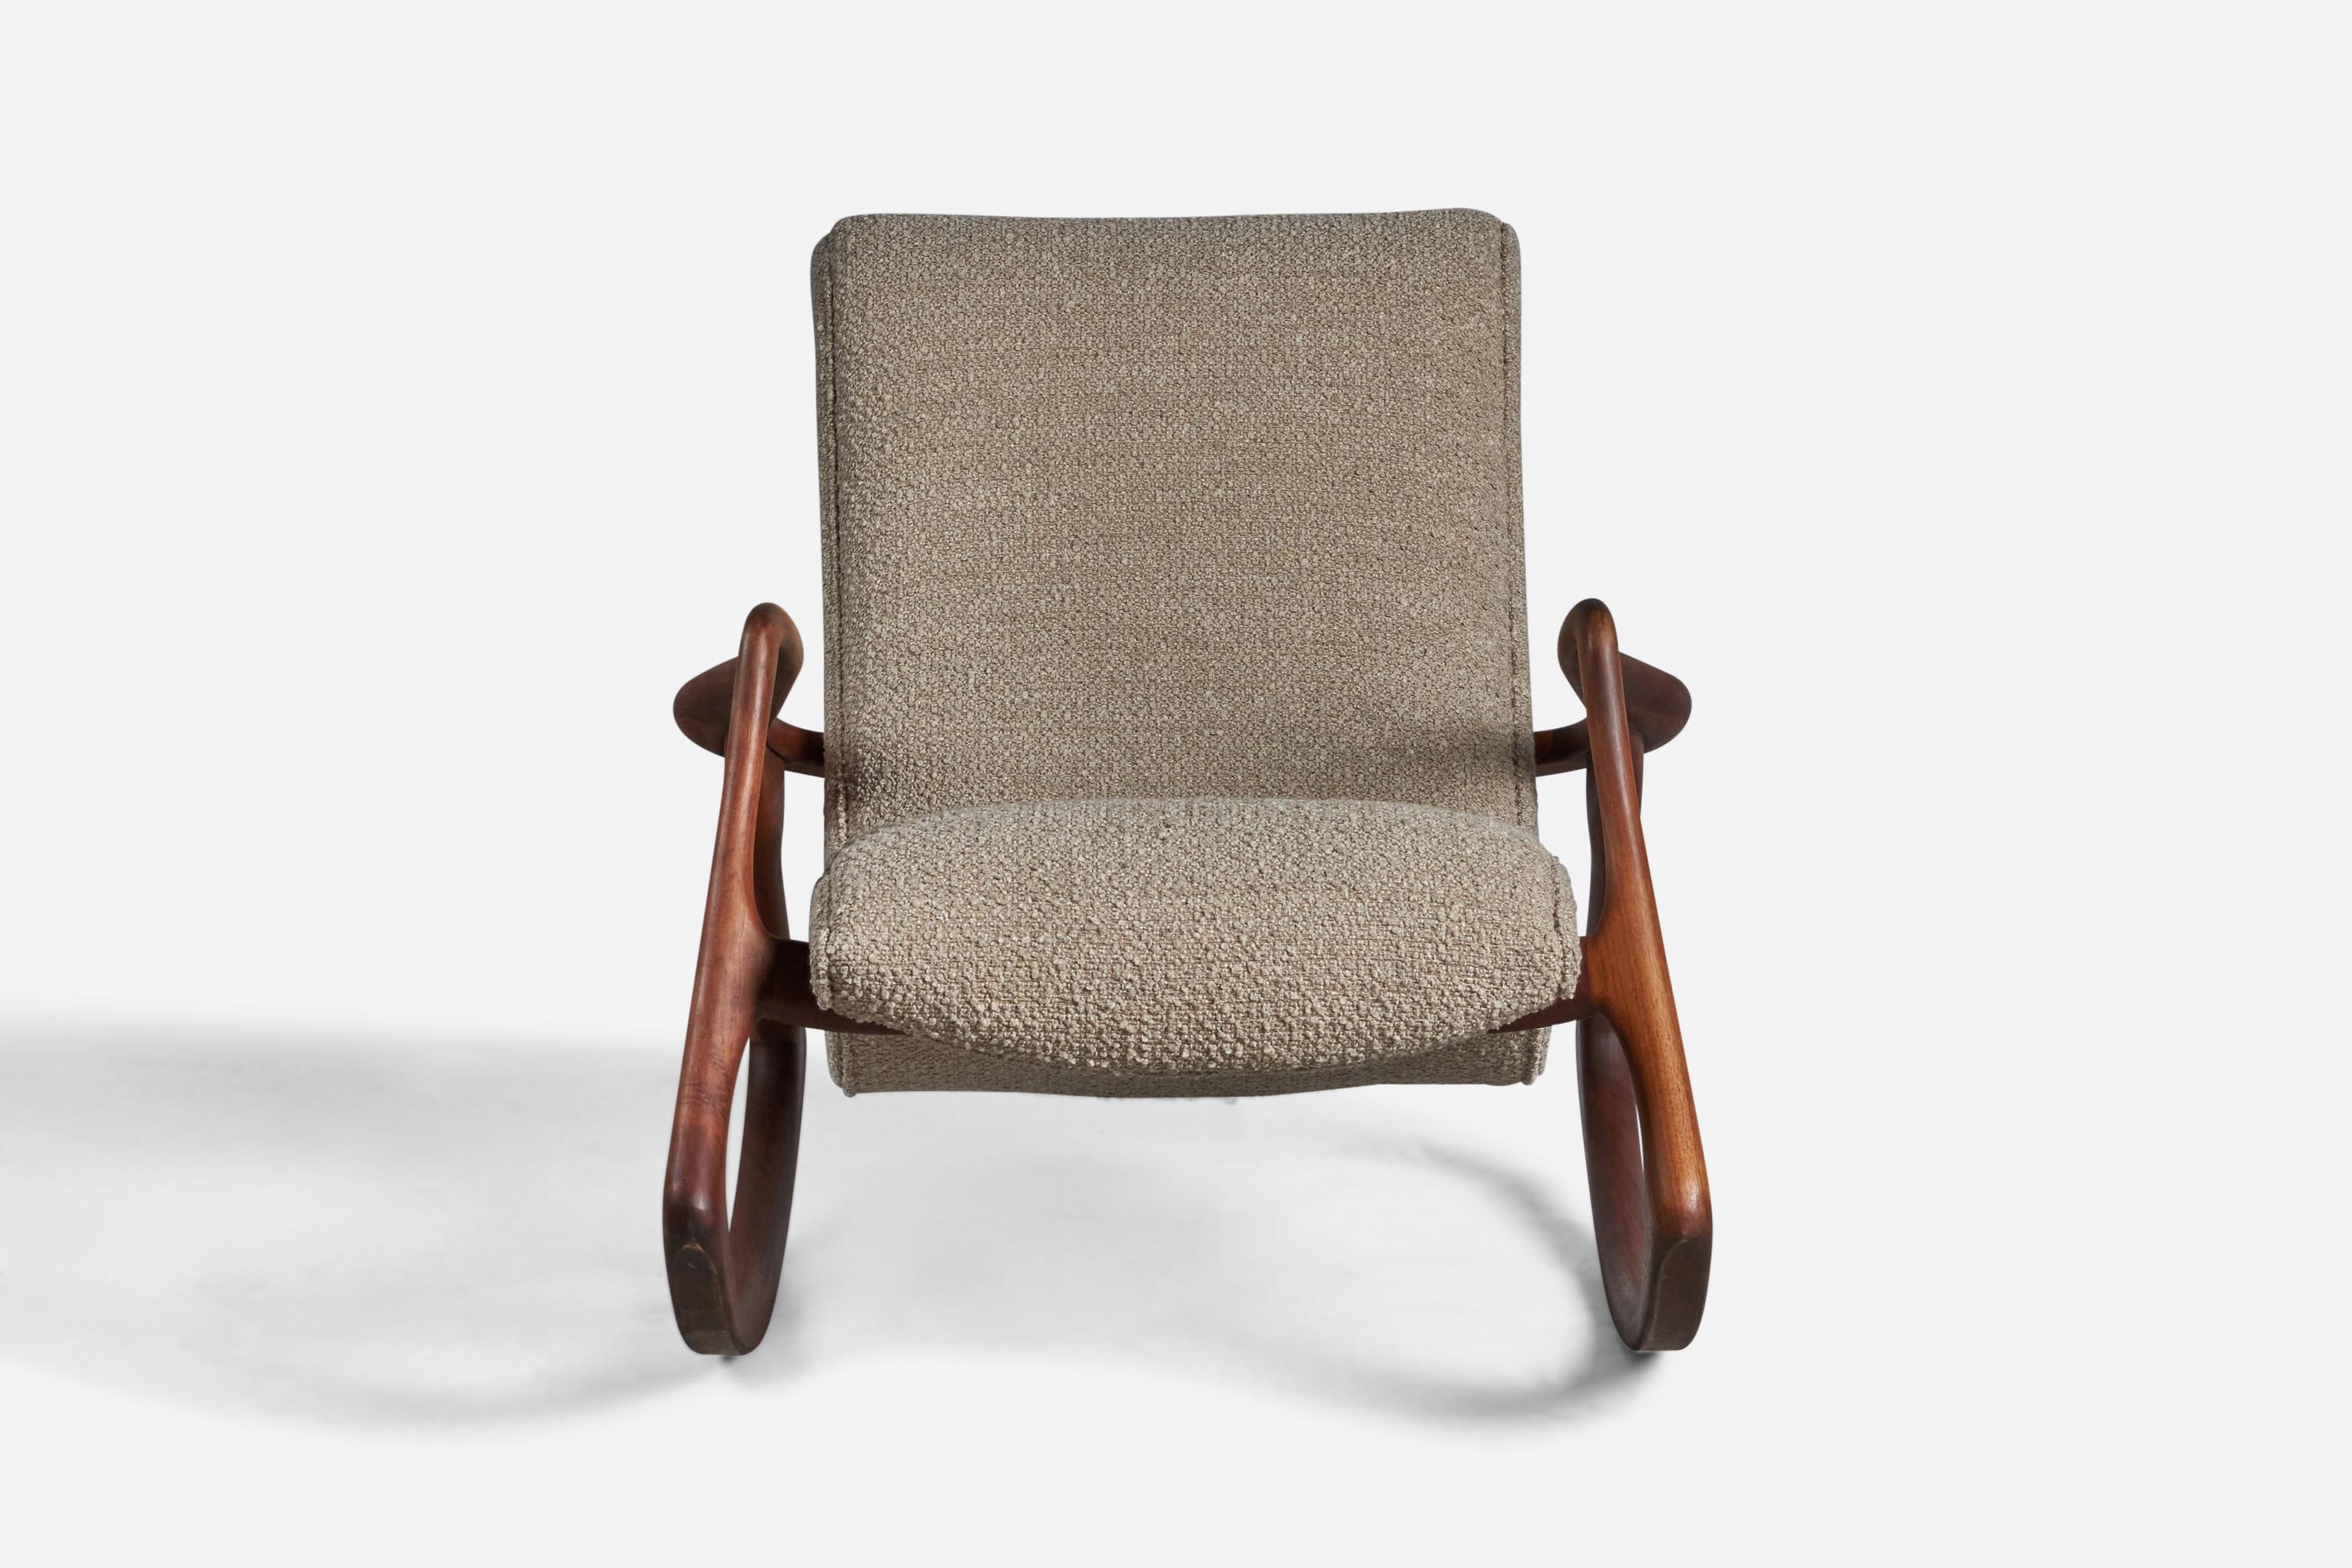 A walnut and bouclé rocking lounge chair designed by Vladimir Kagan and produced by Vladimir Kagan Design Group, USA, early 2000s.

13” seat height